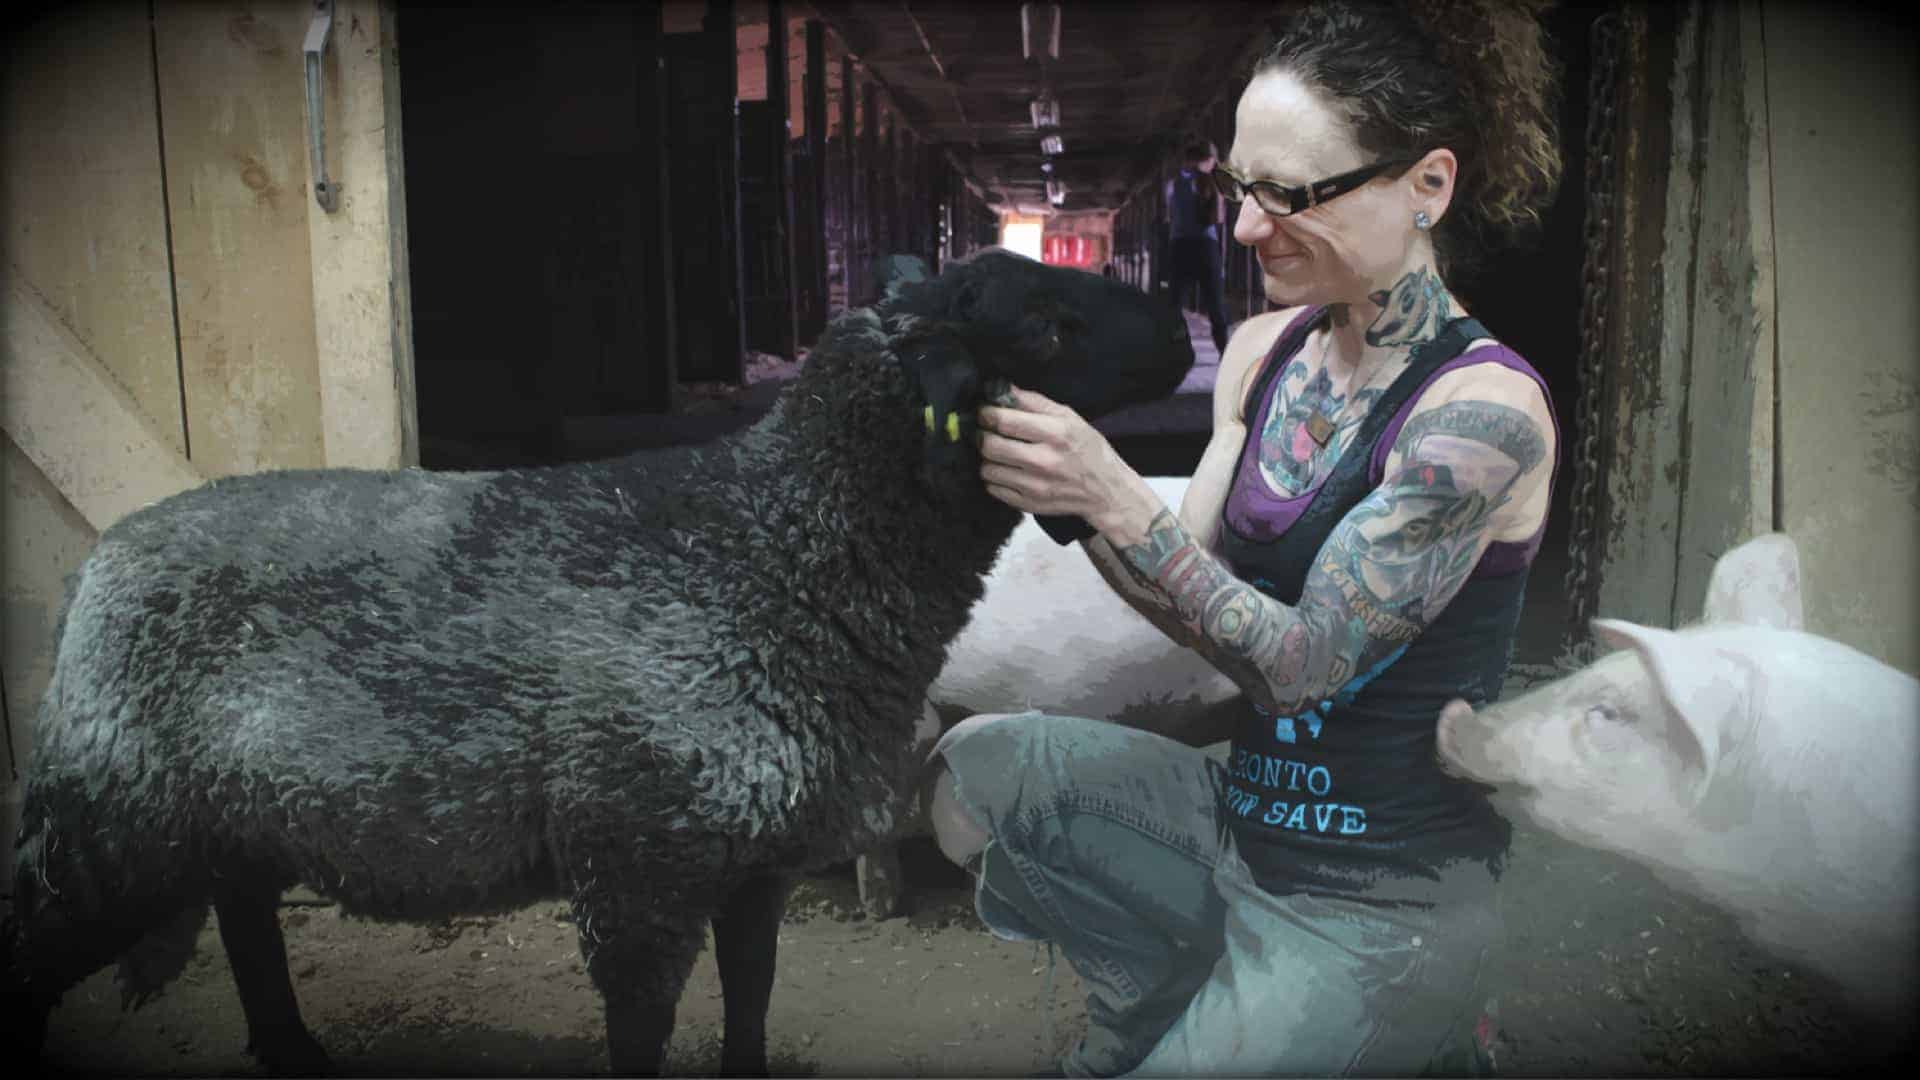 Emily Moran Barwick of Bite Size Vegan is shown kneeling in front of a black sheep. She is holding its head in her hands and looking into its eyes. She has a wide smile upon her face whilst she pets it. To Emily’s left is a small pig that looks to be wanting in on the attention.